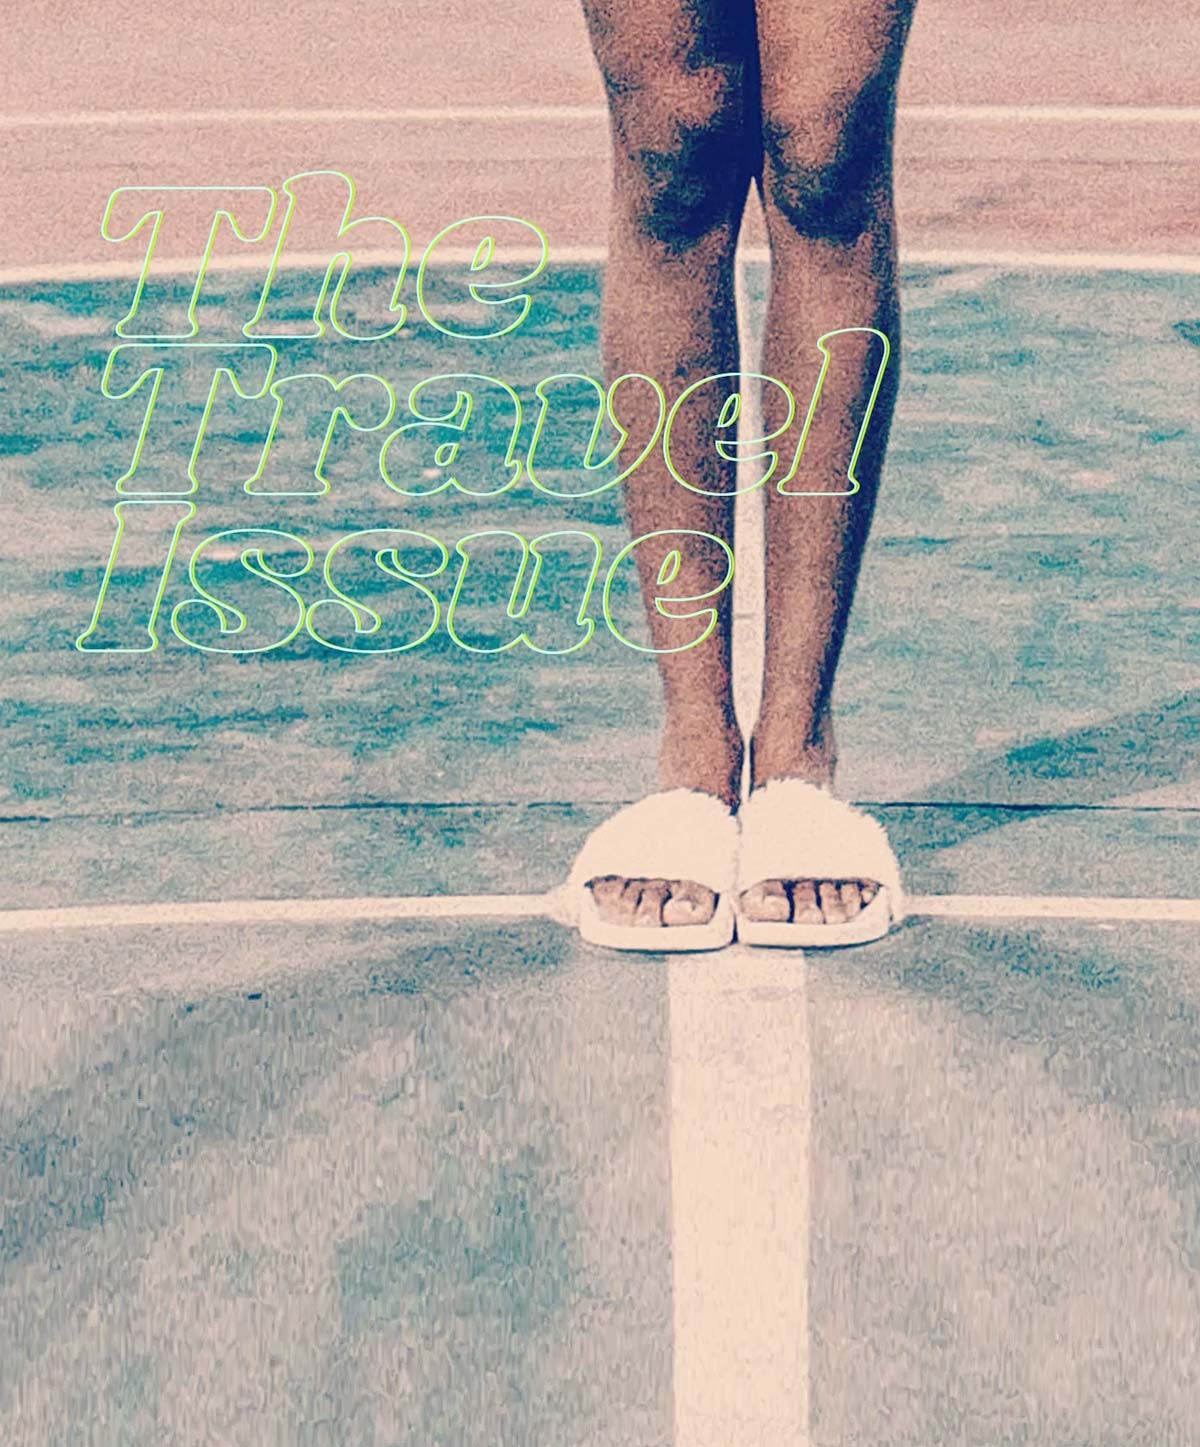 the travel issue [image is legs in slippers standing in tennis court]